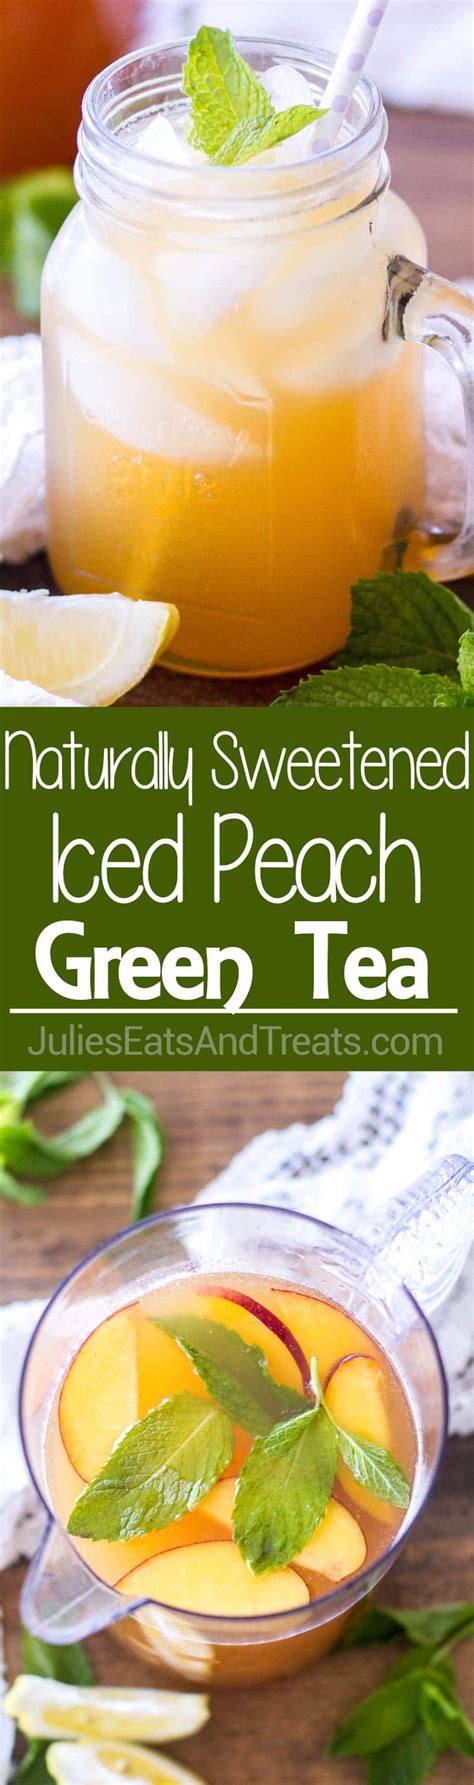 Iced Peach Green Tea ~ This Naturally Sweetened And The Perfect Drink